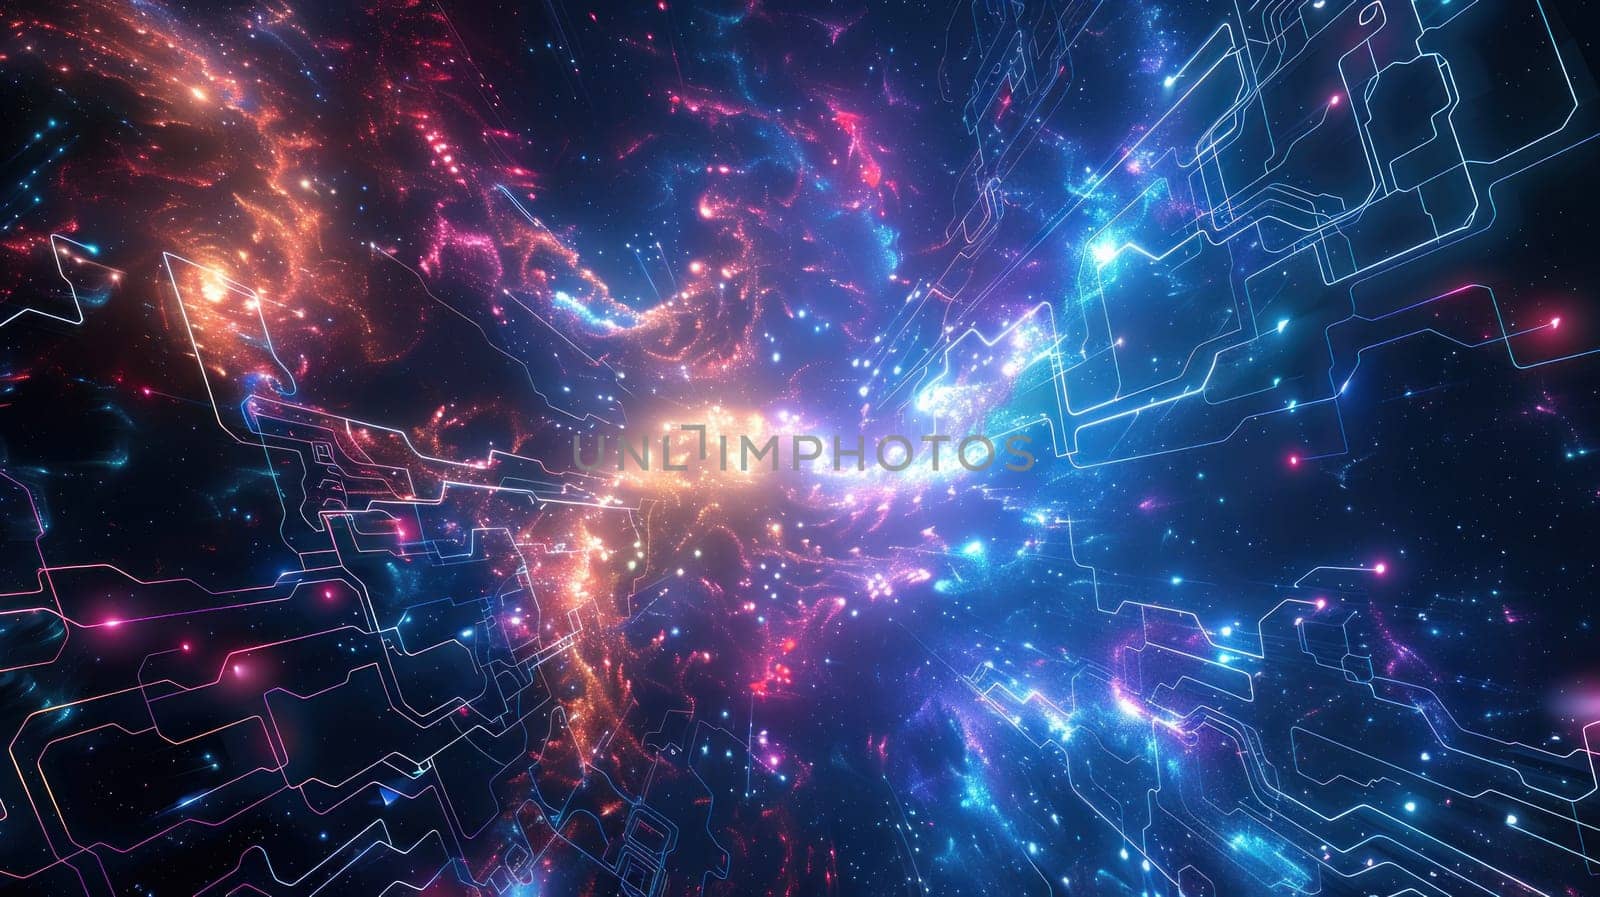 A colorful galaxy with a blue background and red and orange swirls. The stars are bright and the colors are vibrant